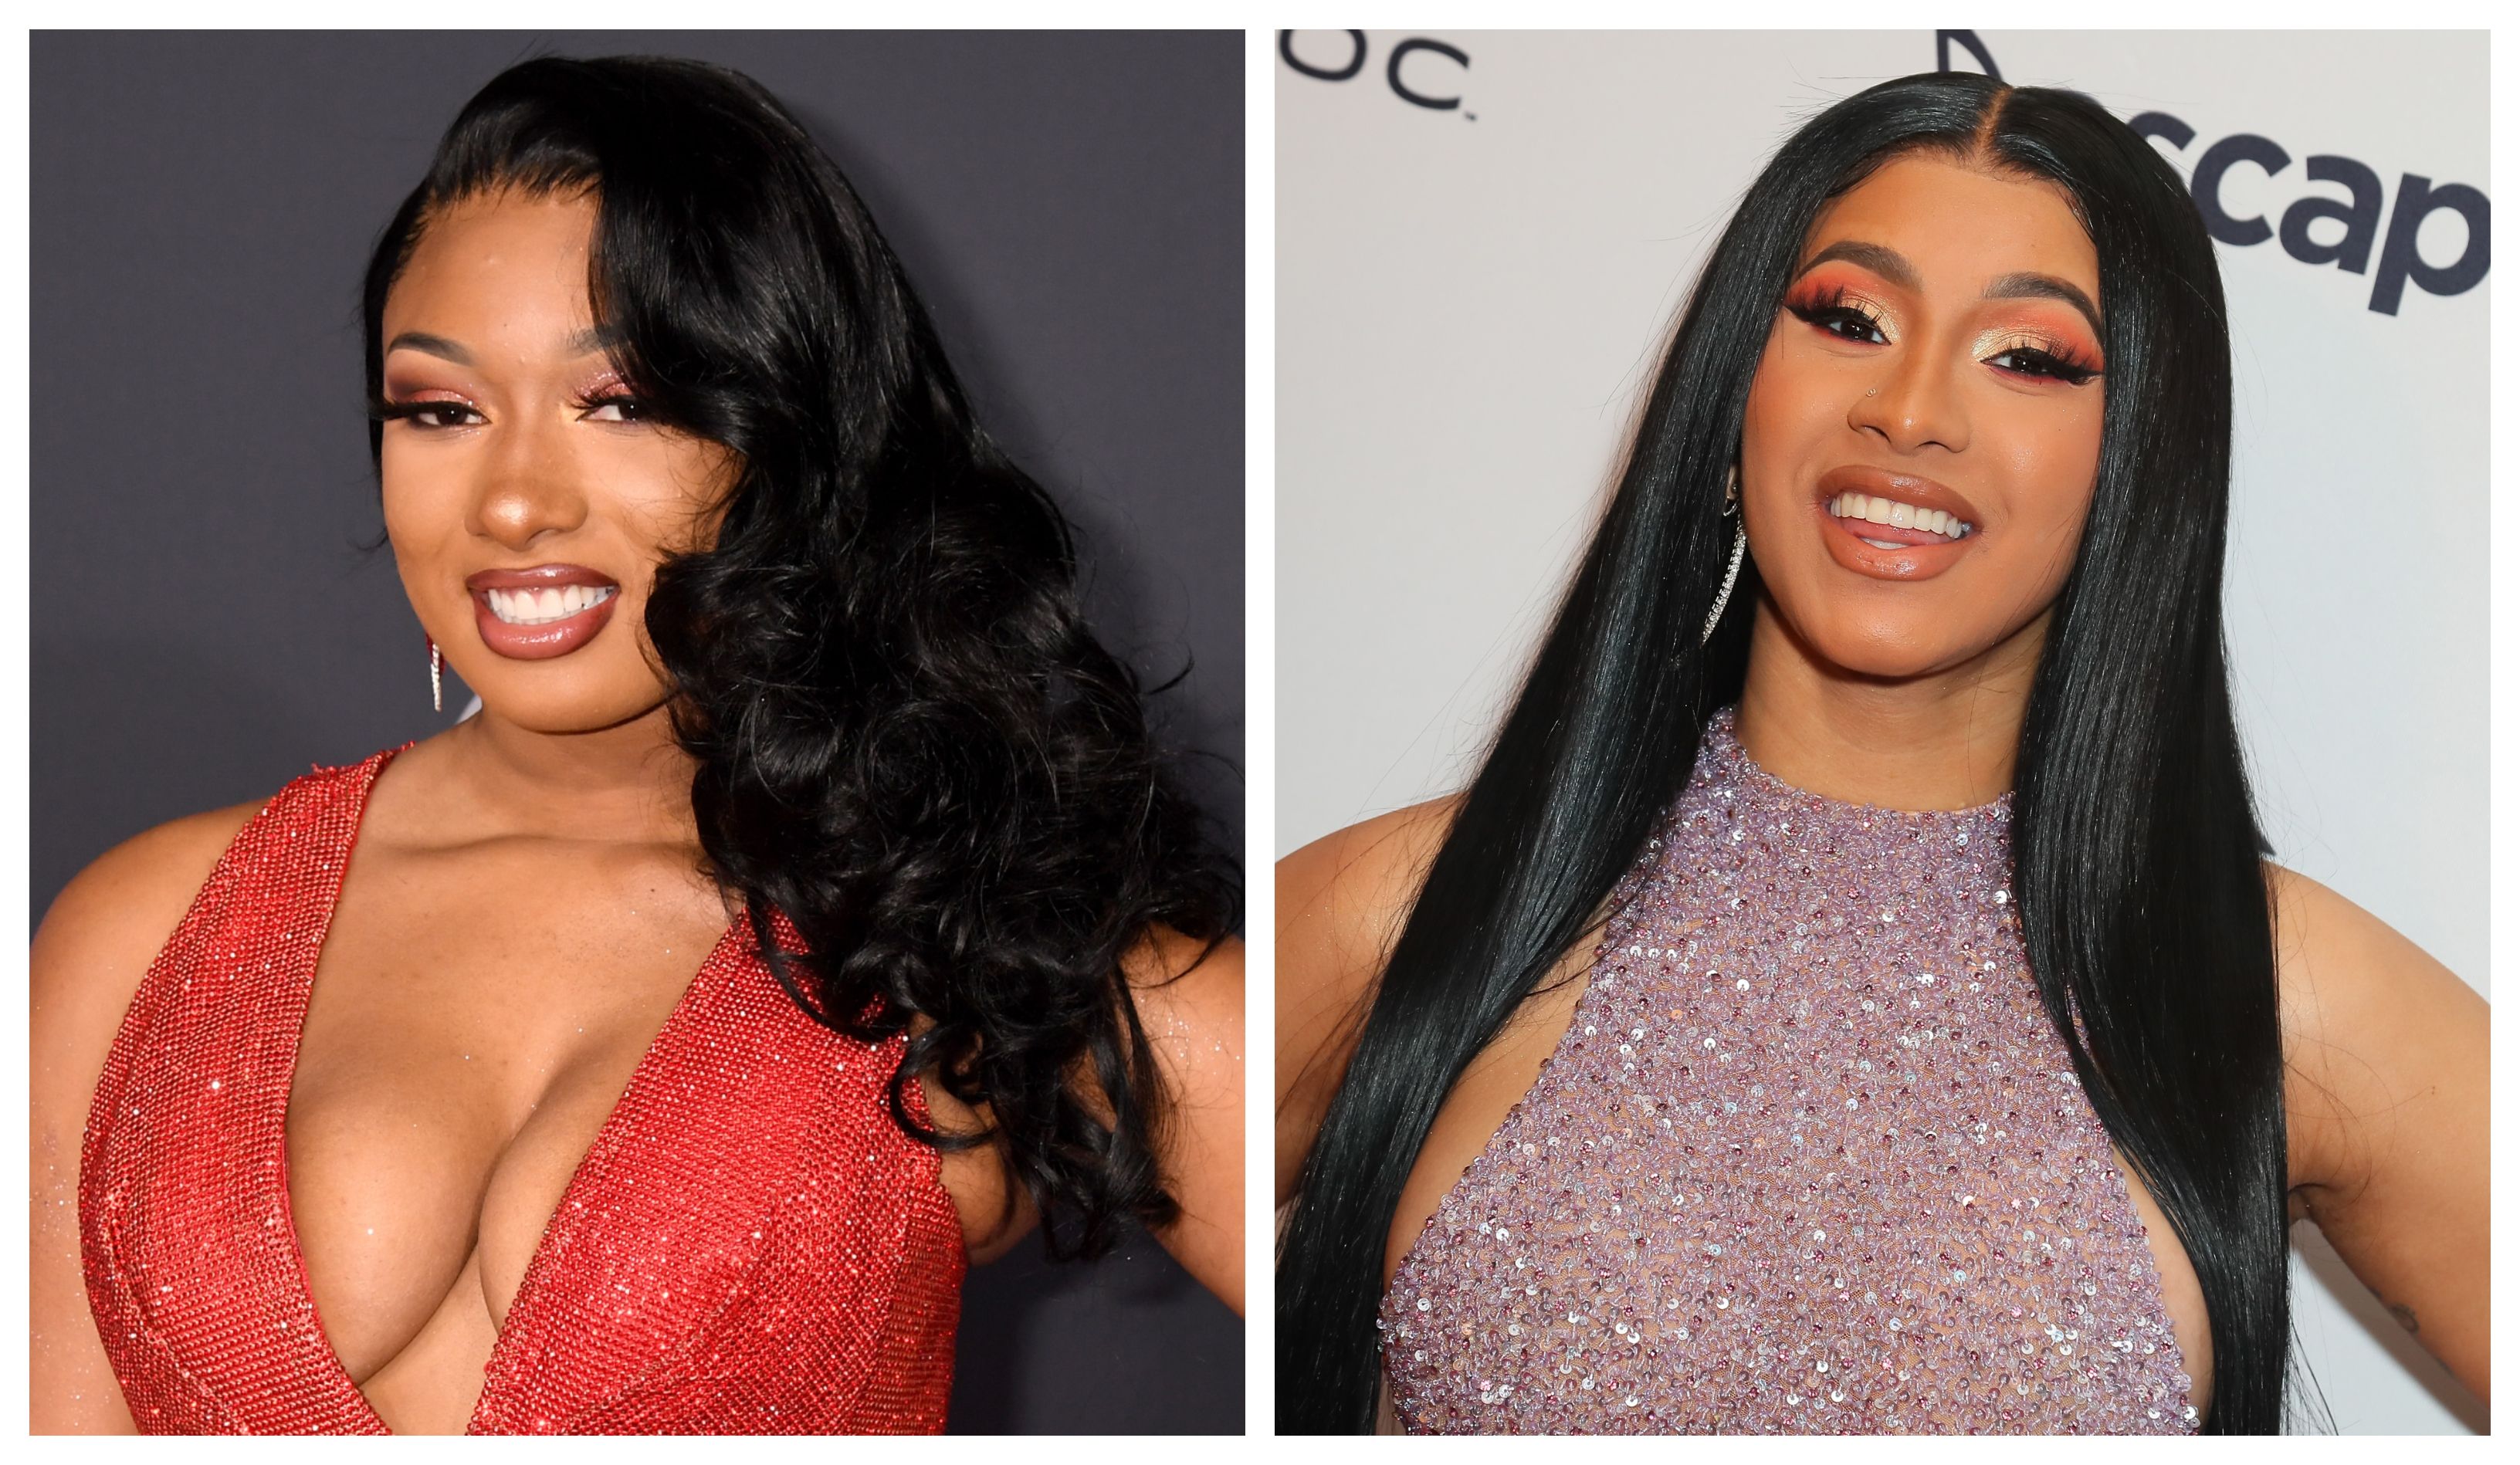 Rappers Megan Thee Stallion And Cardi B Release Highly Anticipated In New Song, 'WAP'